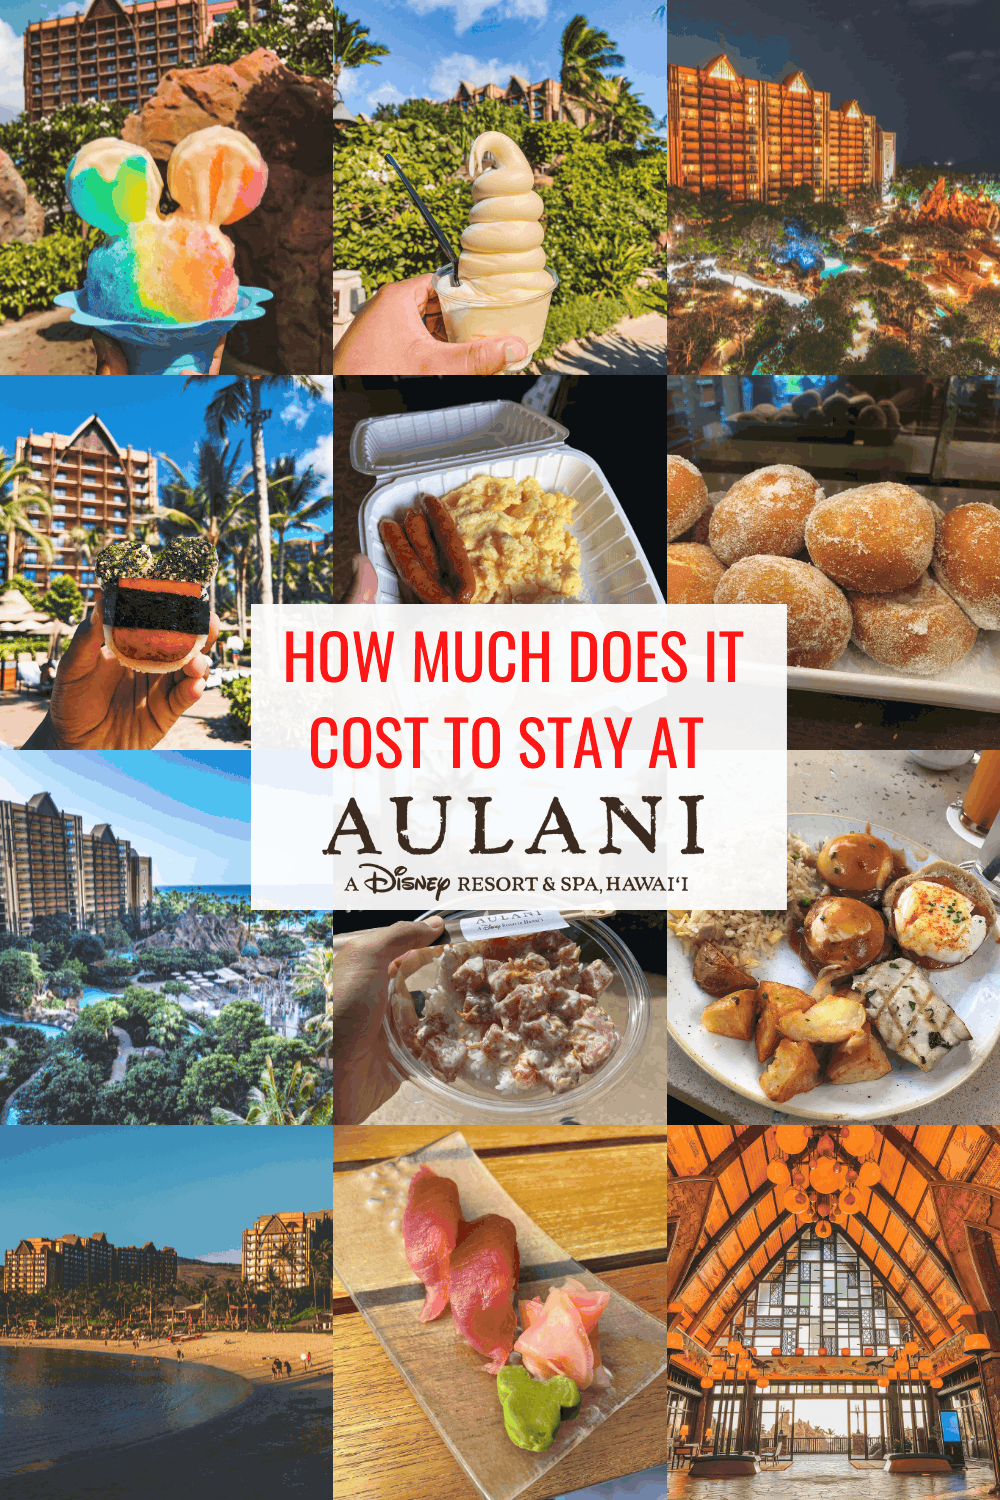 How much does it cost to stay at Aulani